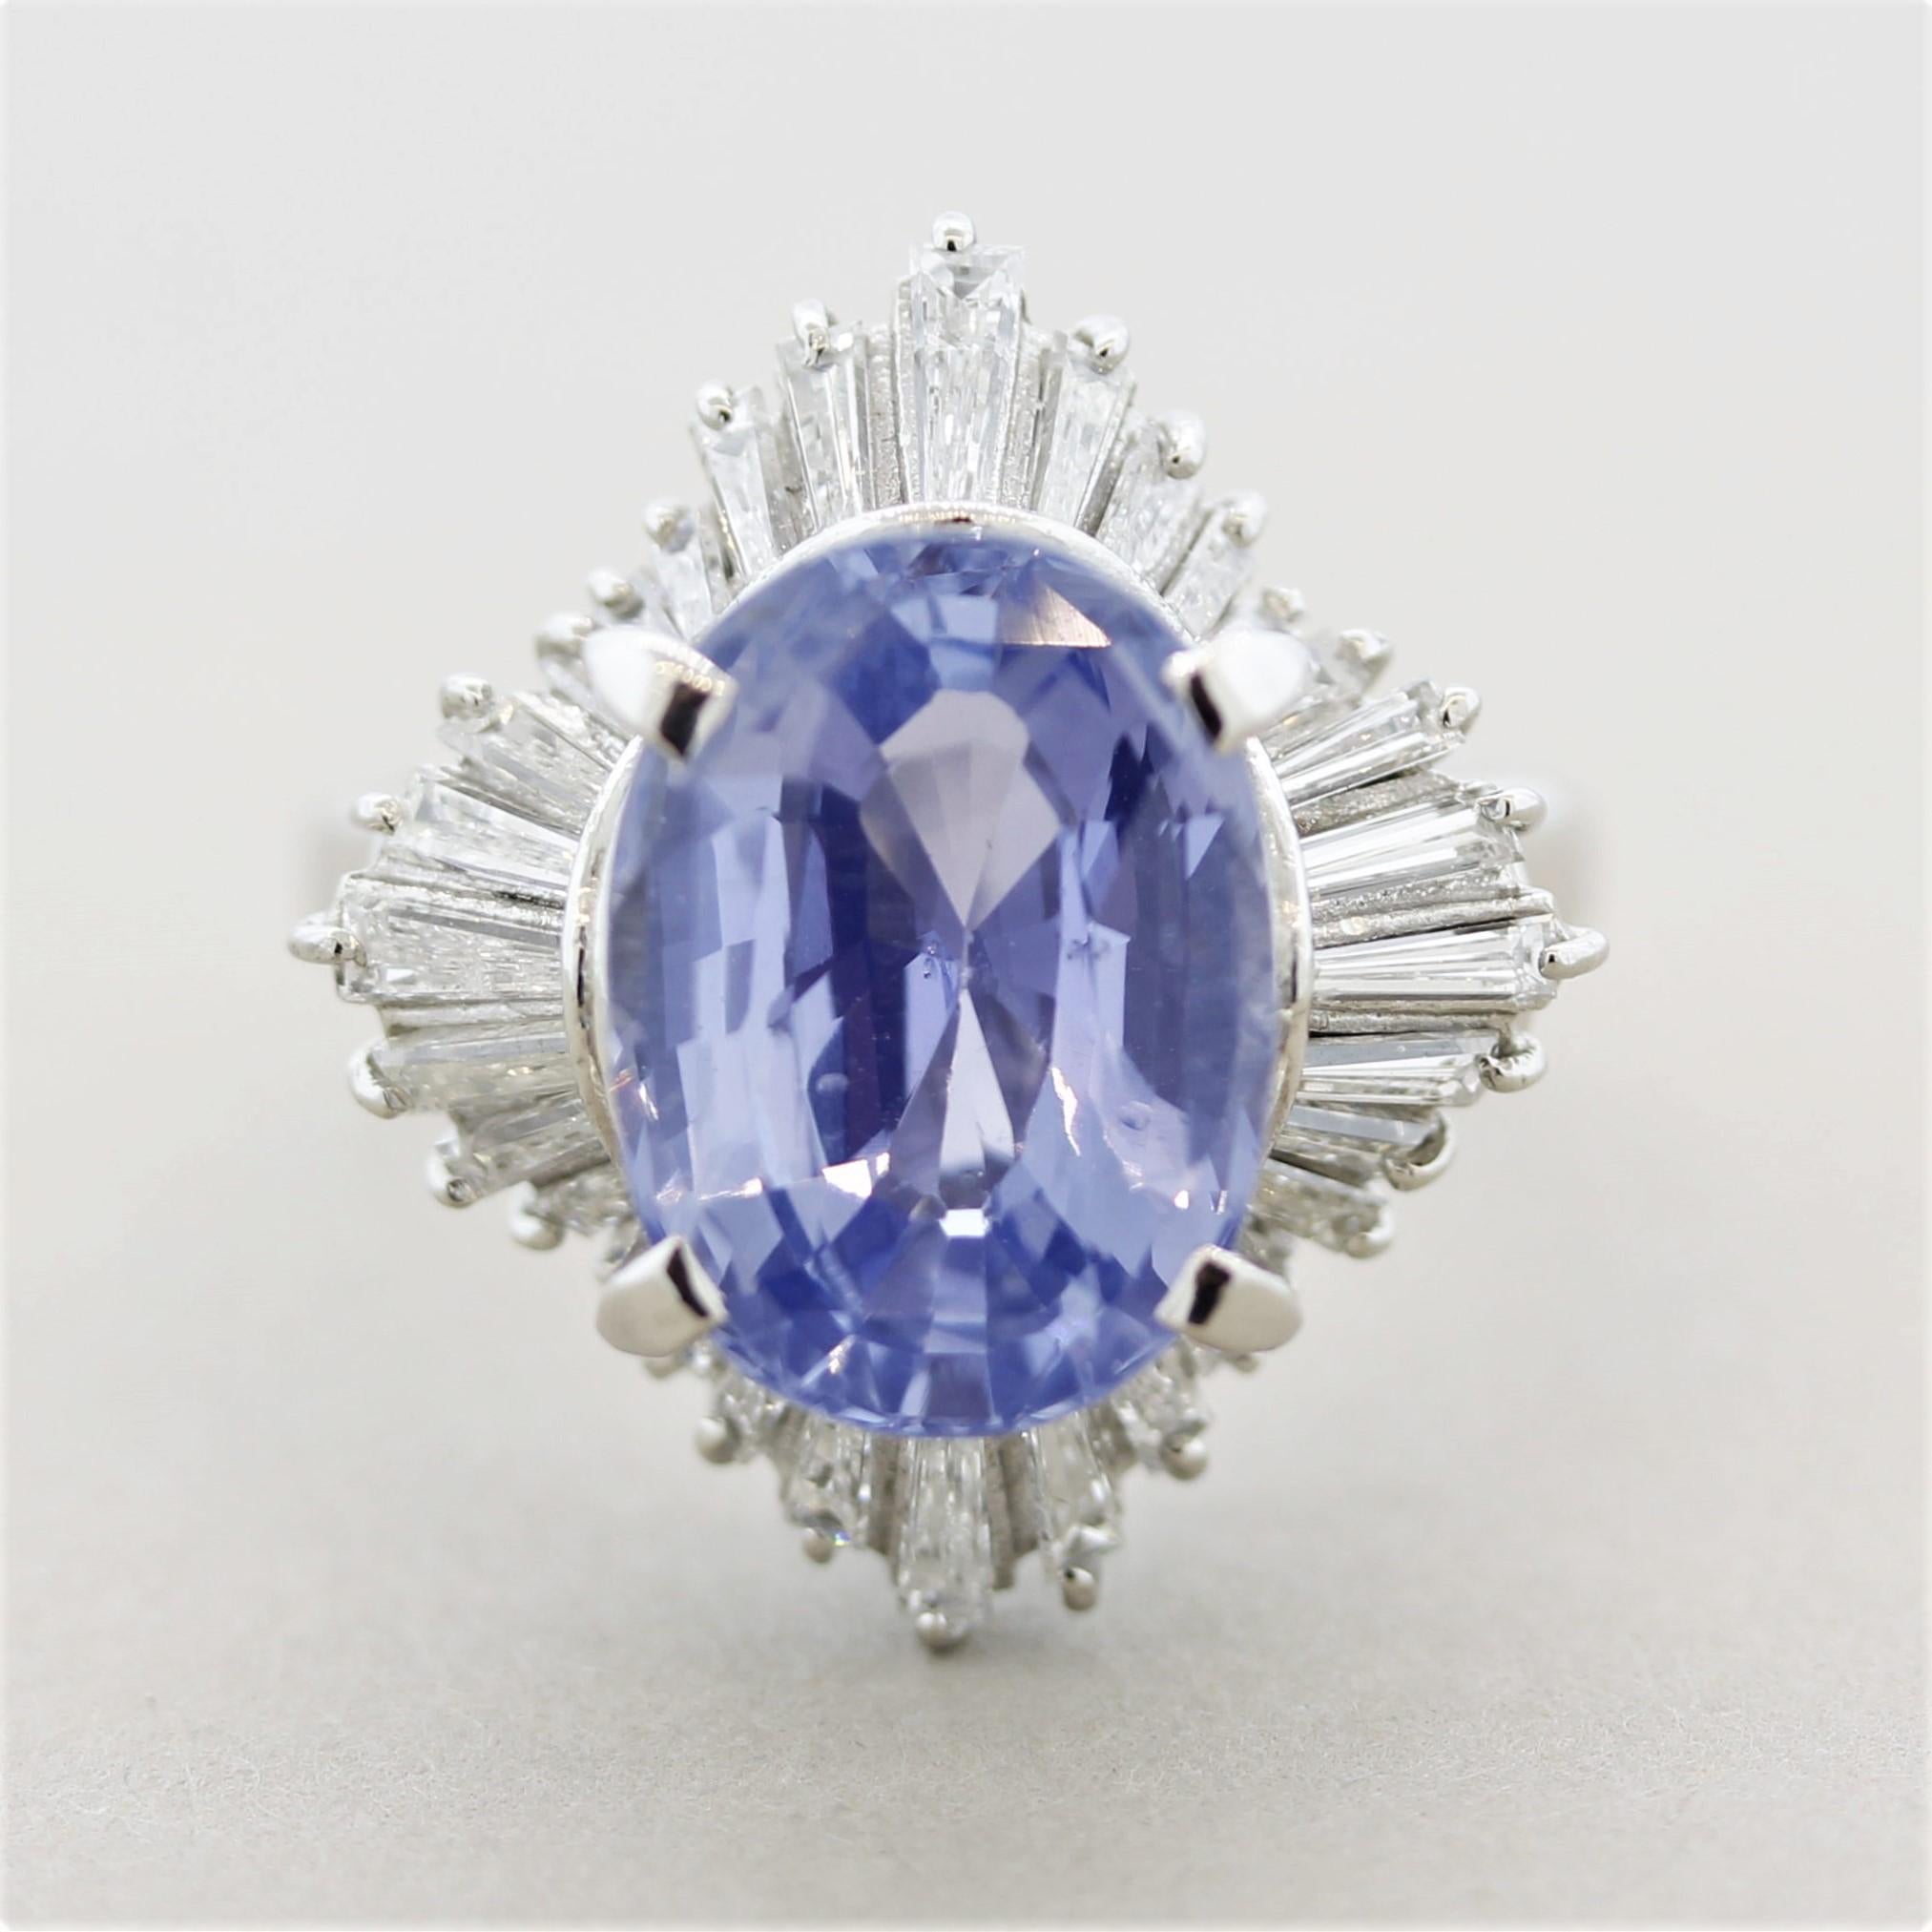 A large and impressive blue sapphire weighing 7.84 carats takes center stage! The oval-shaped gem has a bright and brilliant light-blue color that shines brightly. The sapphire is certified by the GIA as natural with no treatments at all, same as